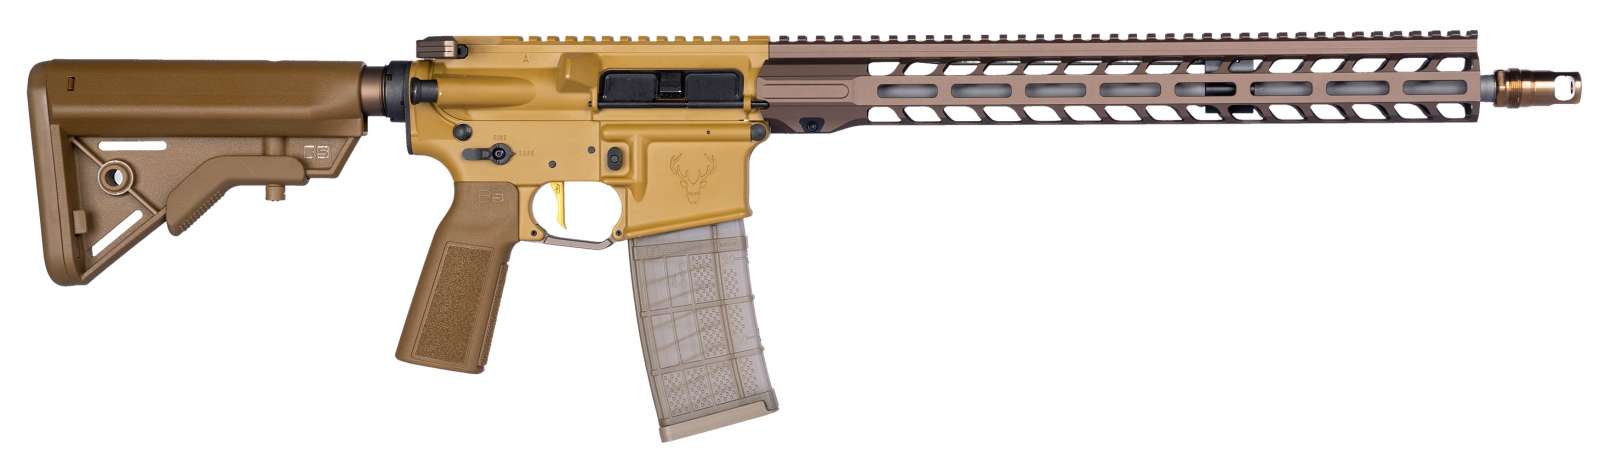 STAG 15 SPECTRM 1 5.56 16" 30 RD VARIOUS SHADES OF FDE RH-img-0